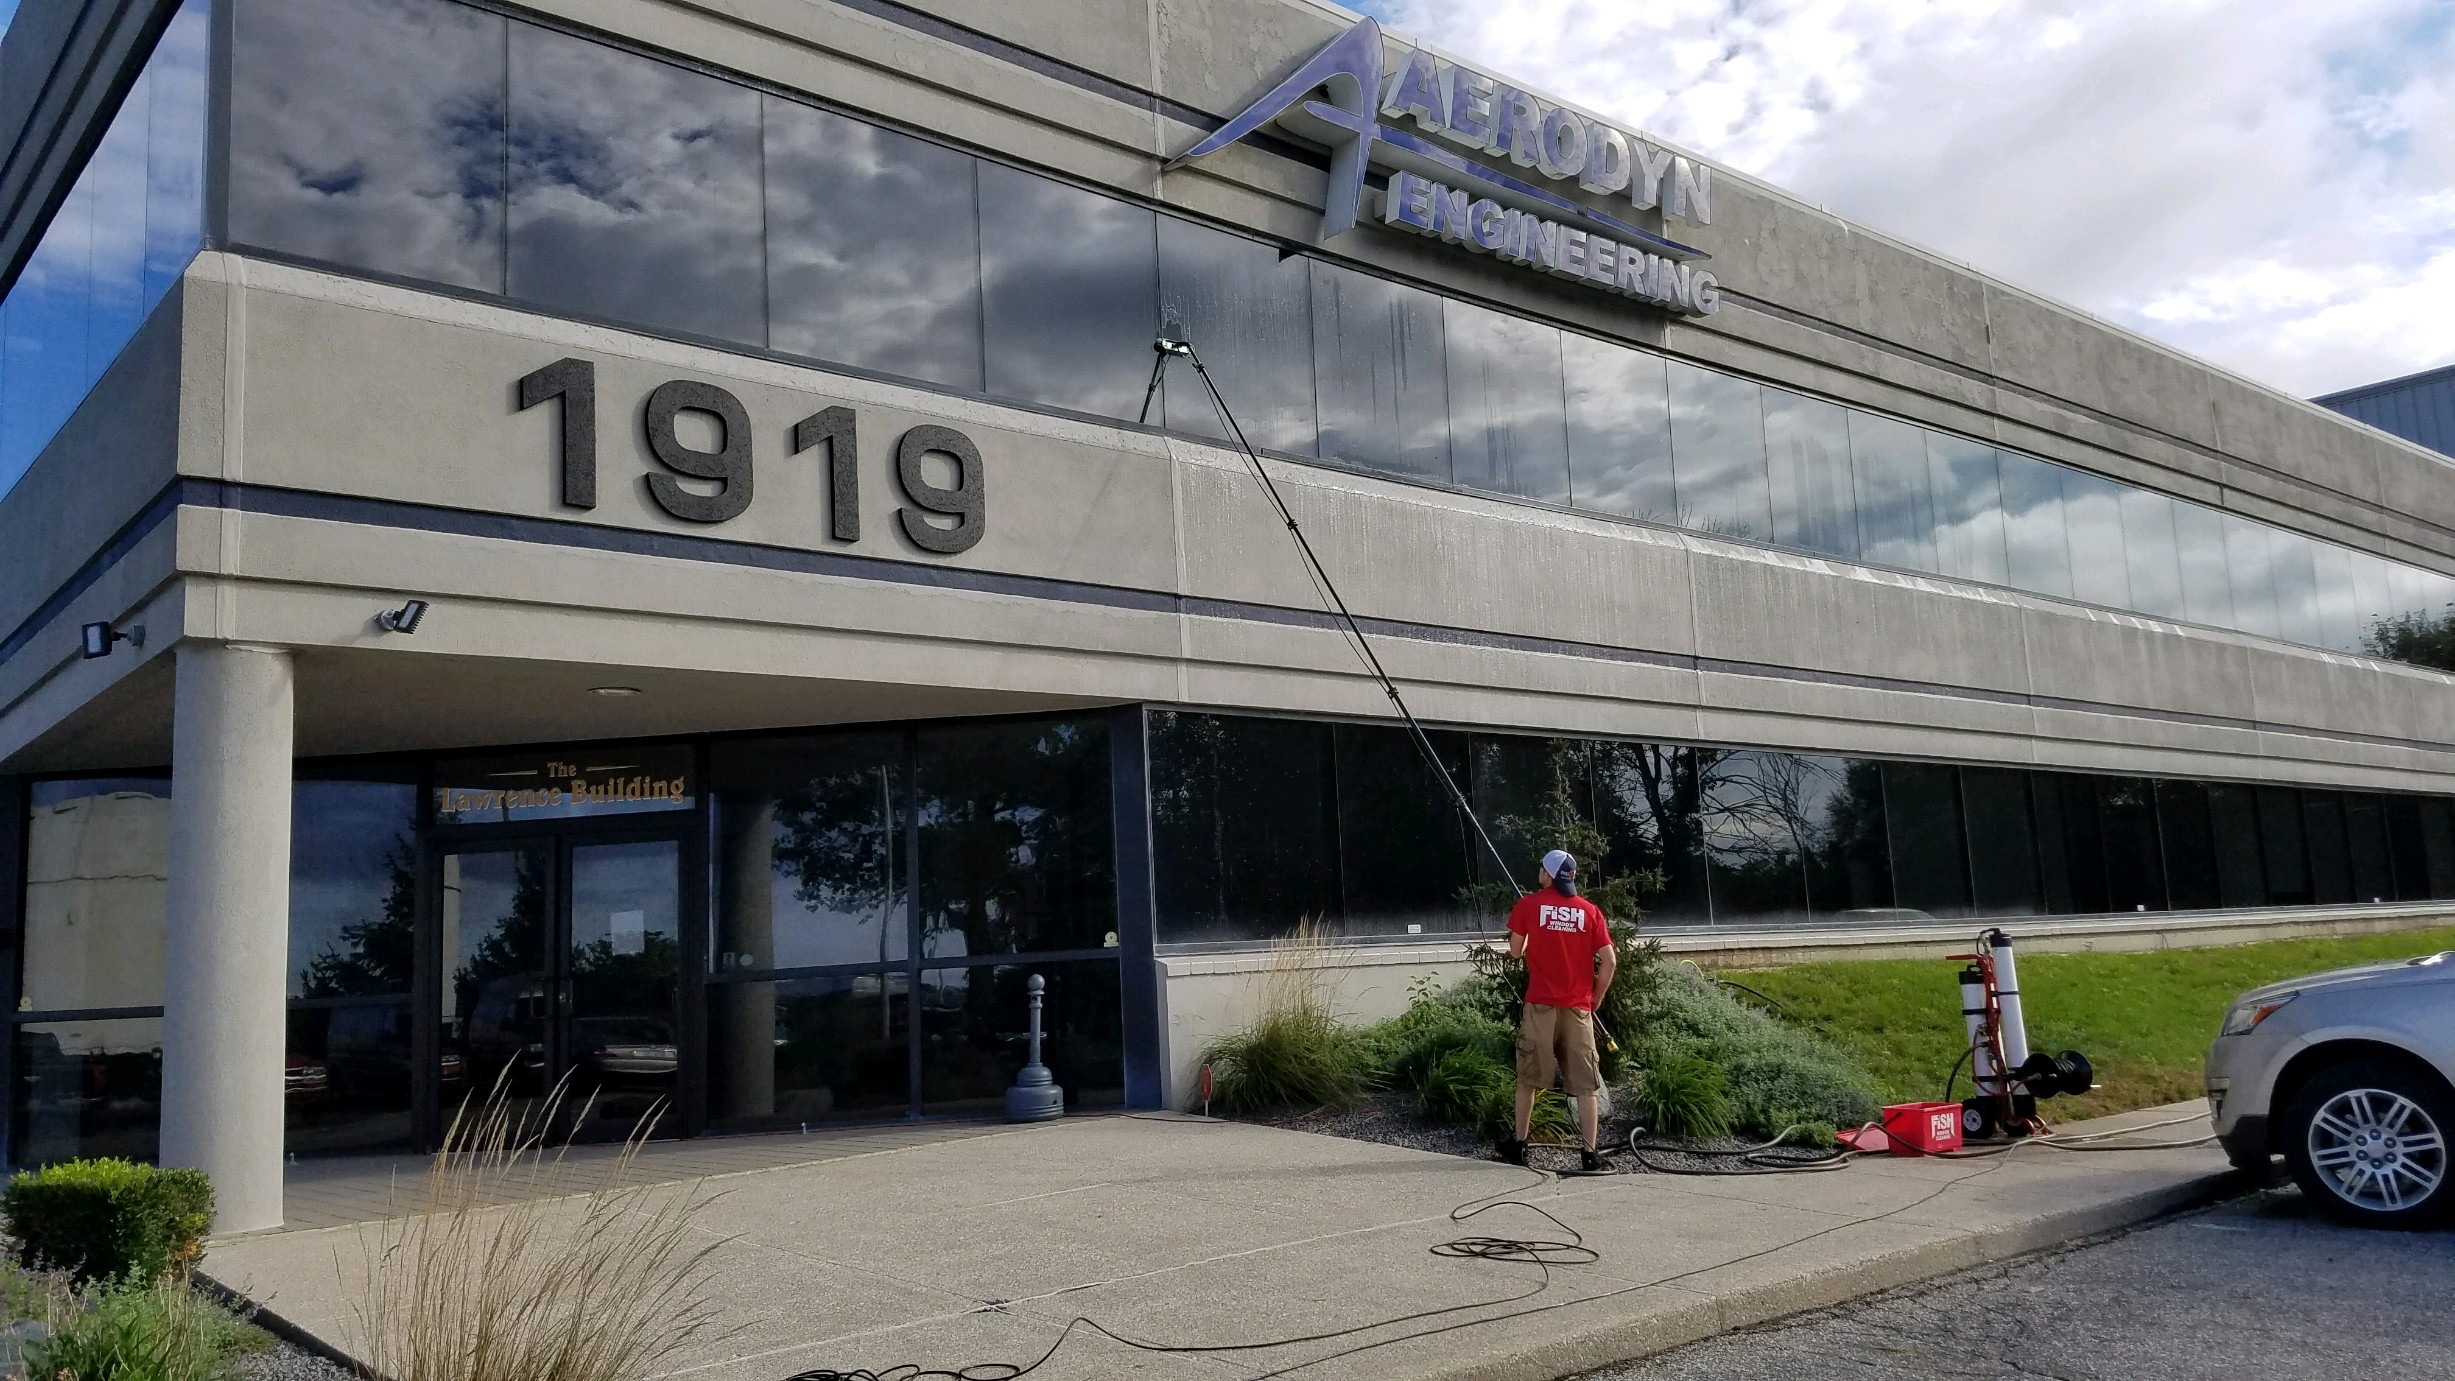 Fish Window Cleaner Cleans 2nd Story Office Building Windows with a Water-Fed Pole